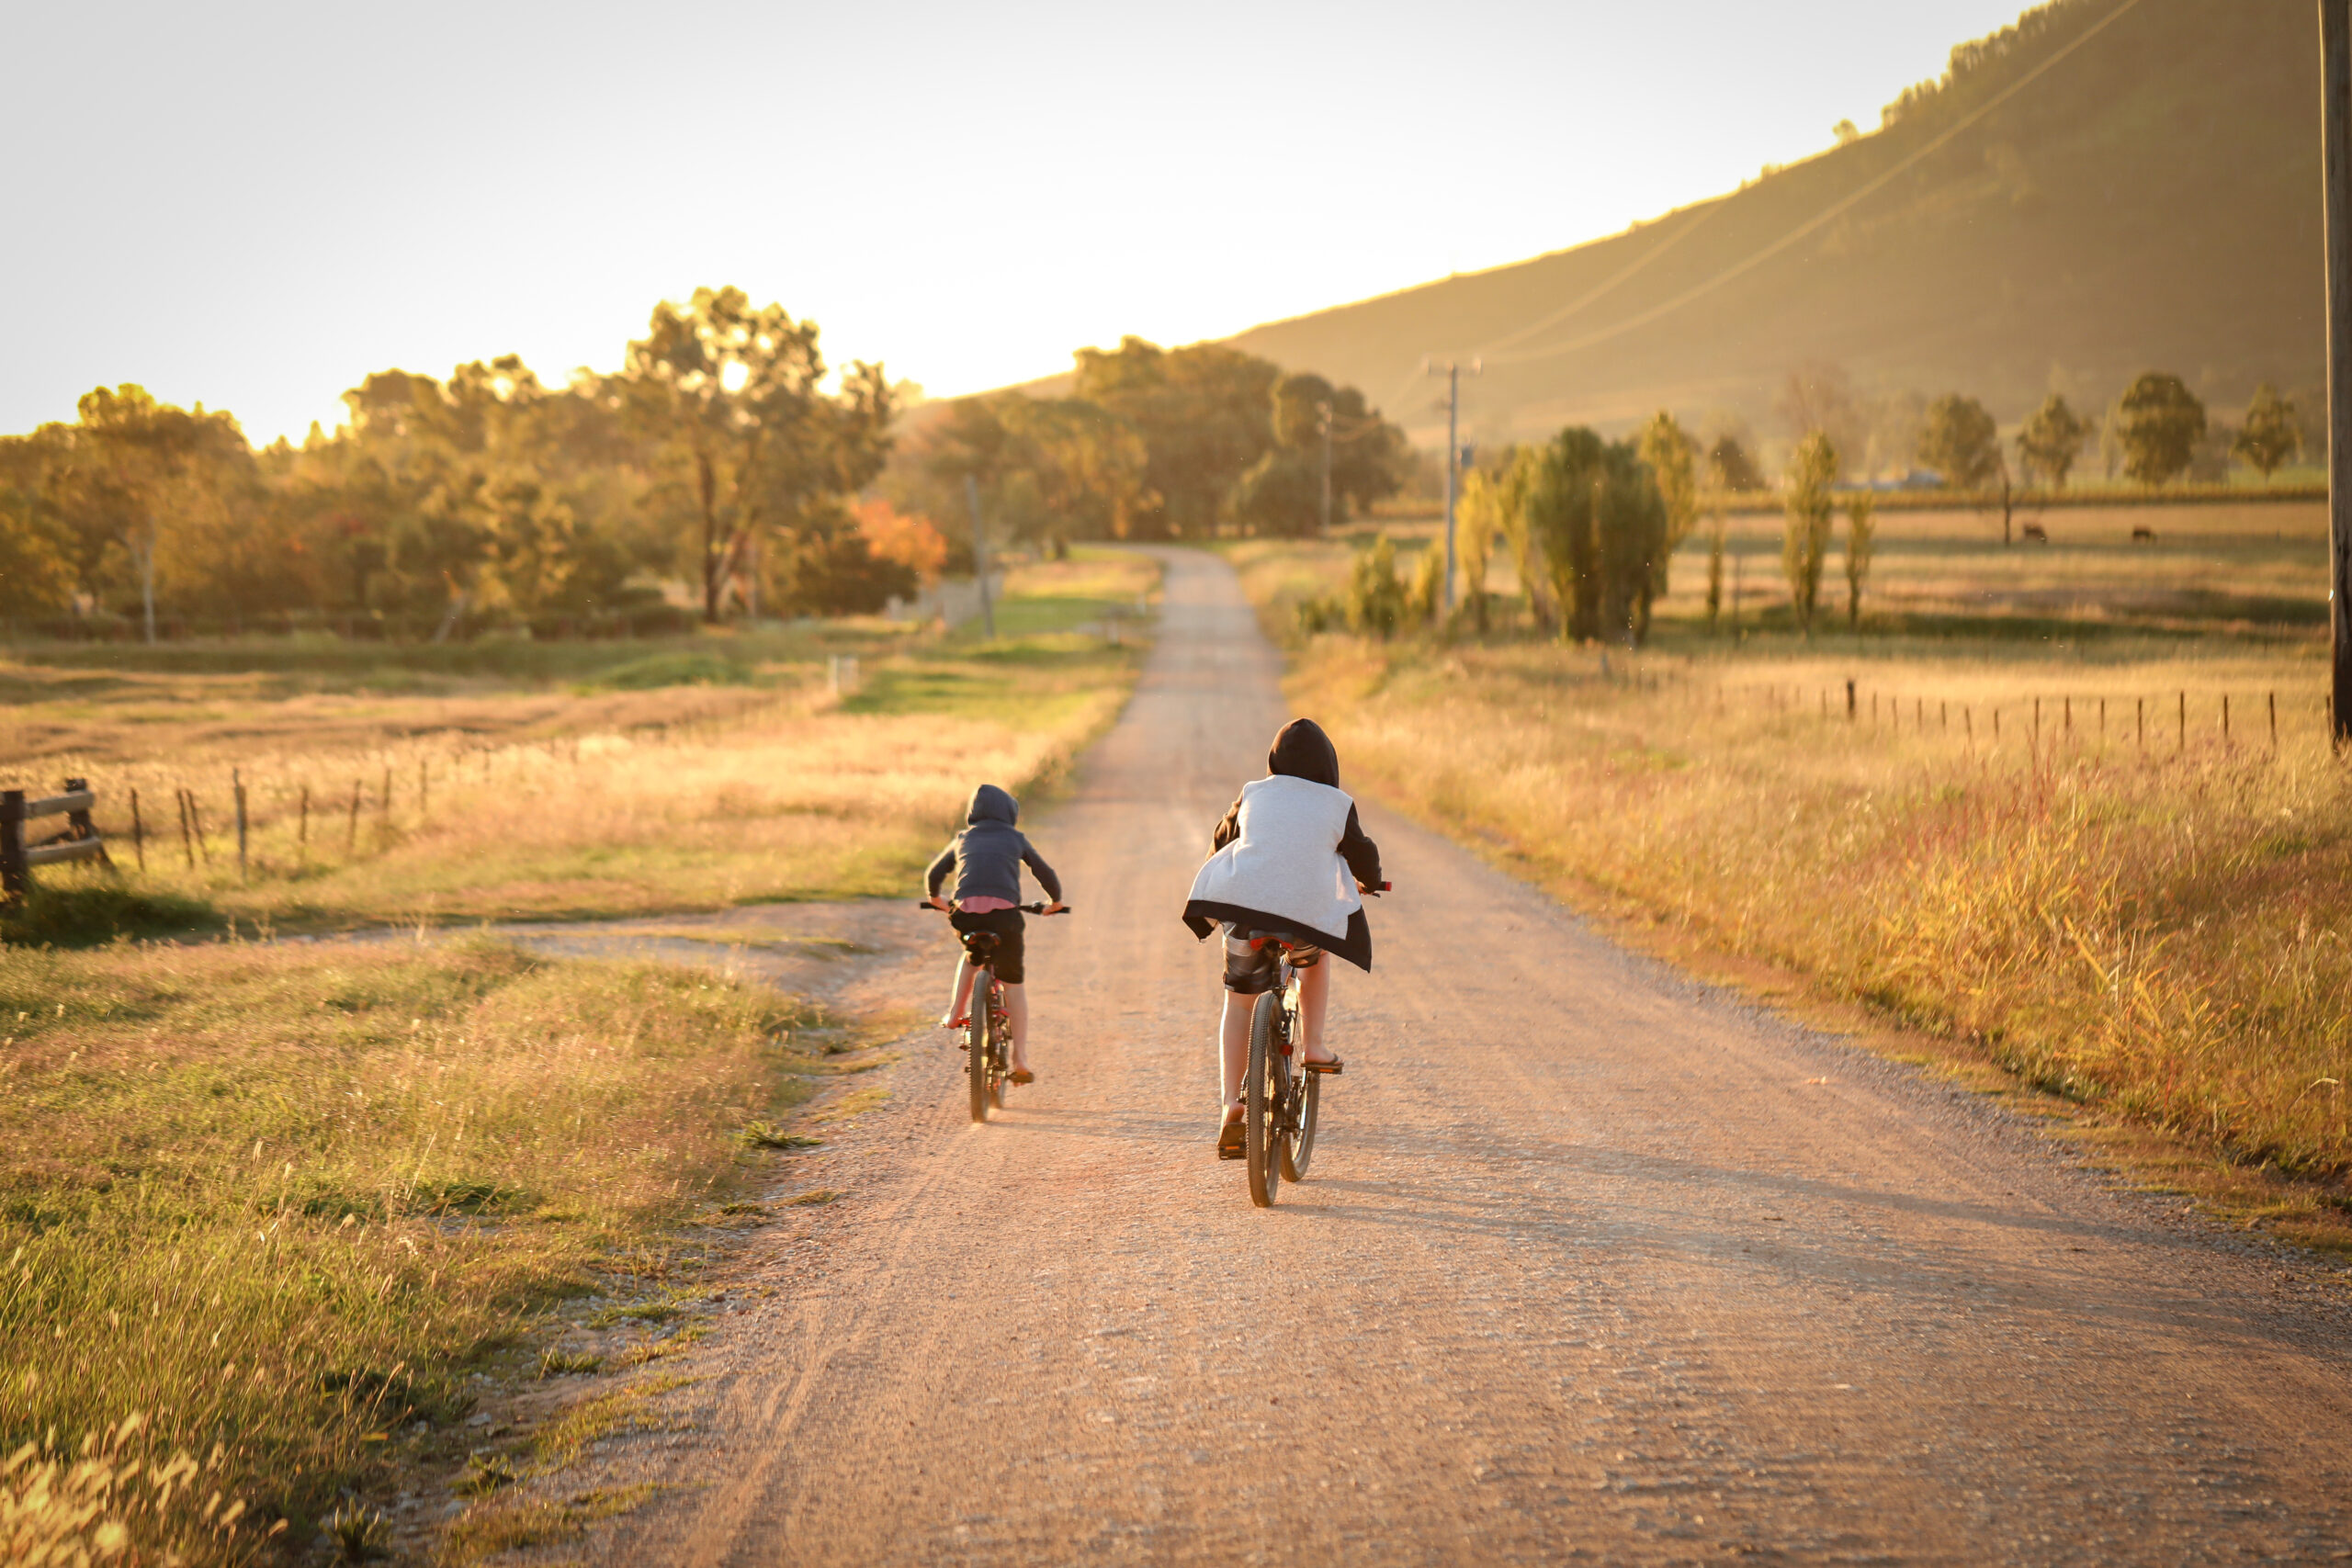 Children riding bicycles on a country road